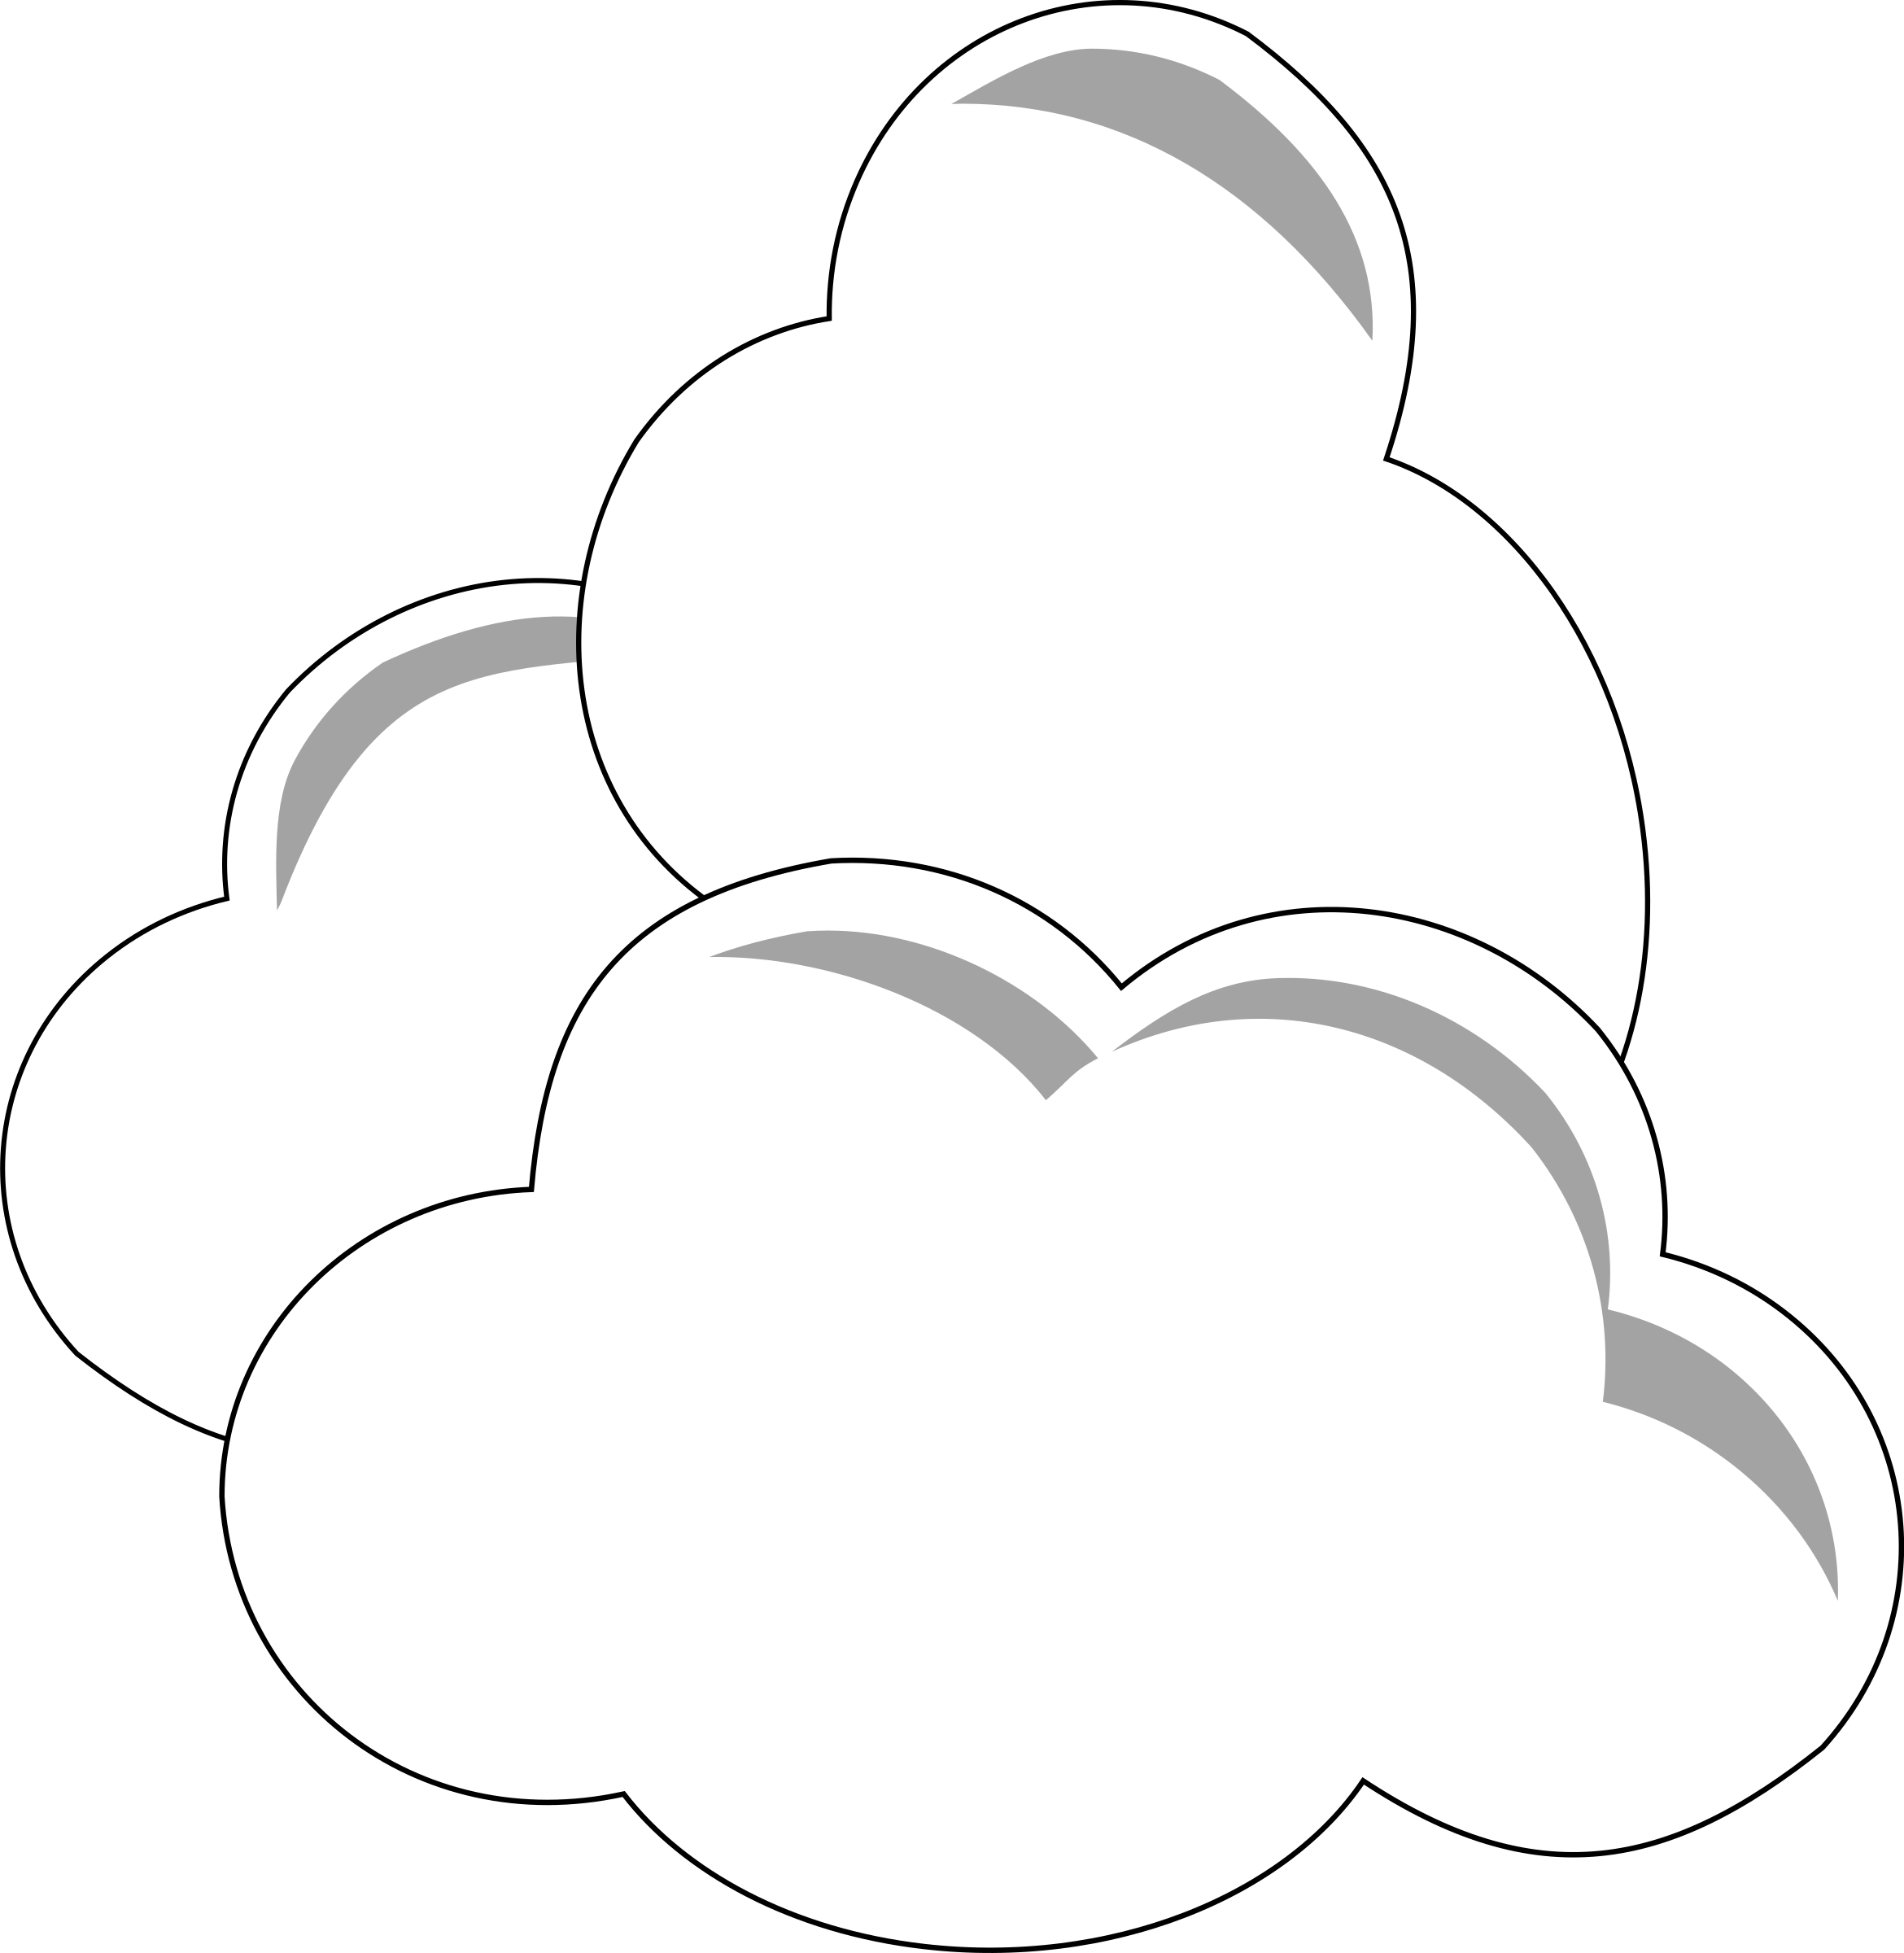 Clouds Clipart Simple - Comulus Clouds Clipart Black And White (2340x2400)